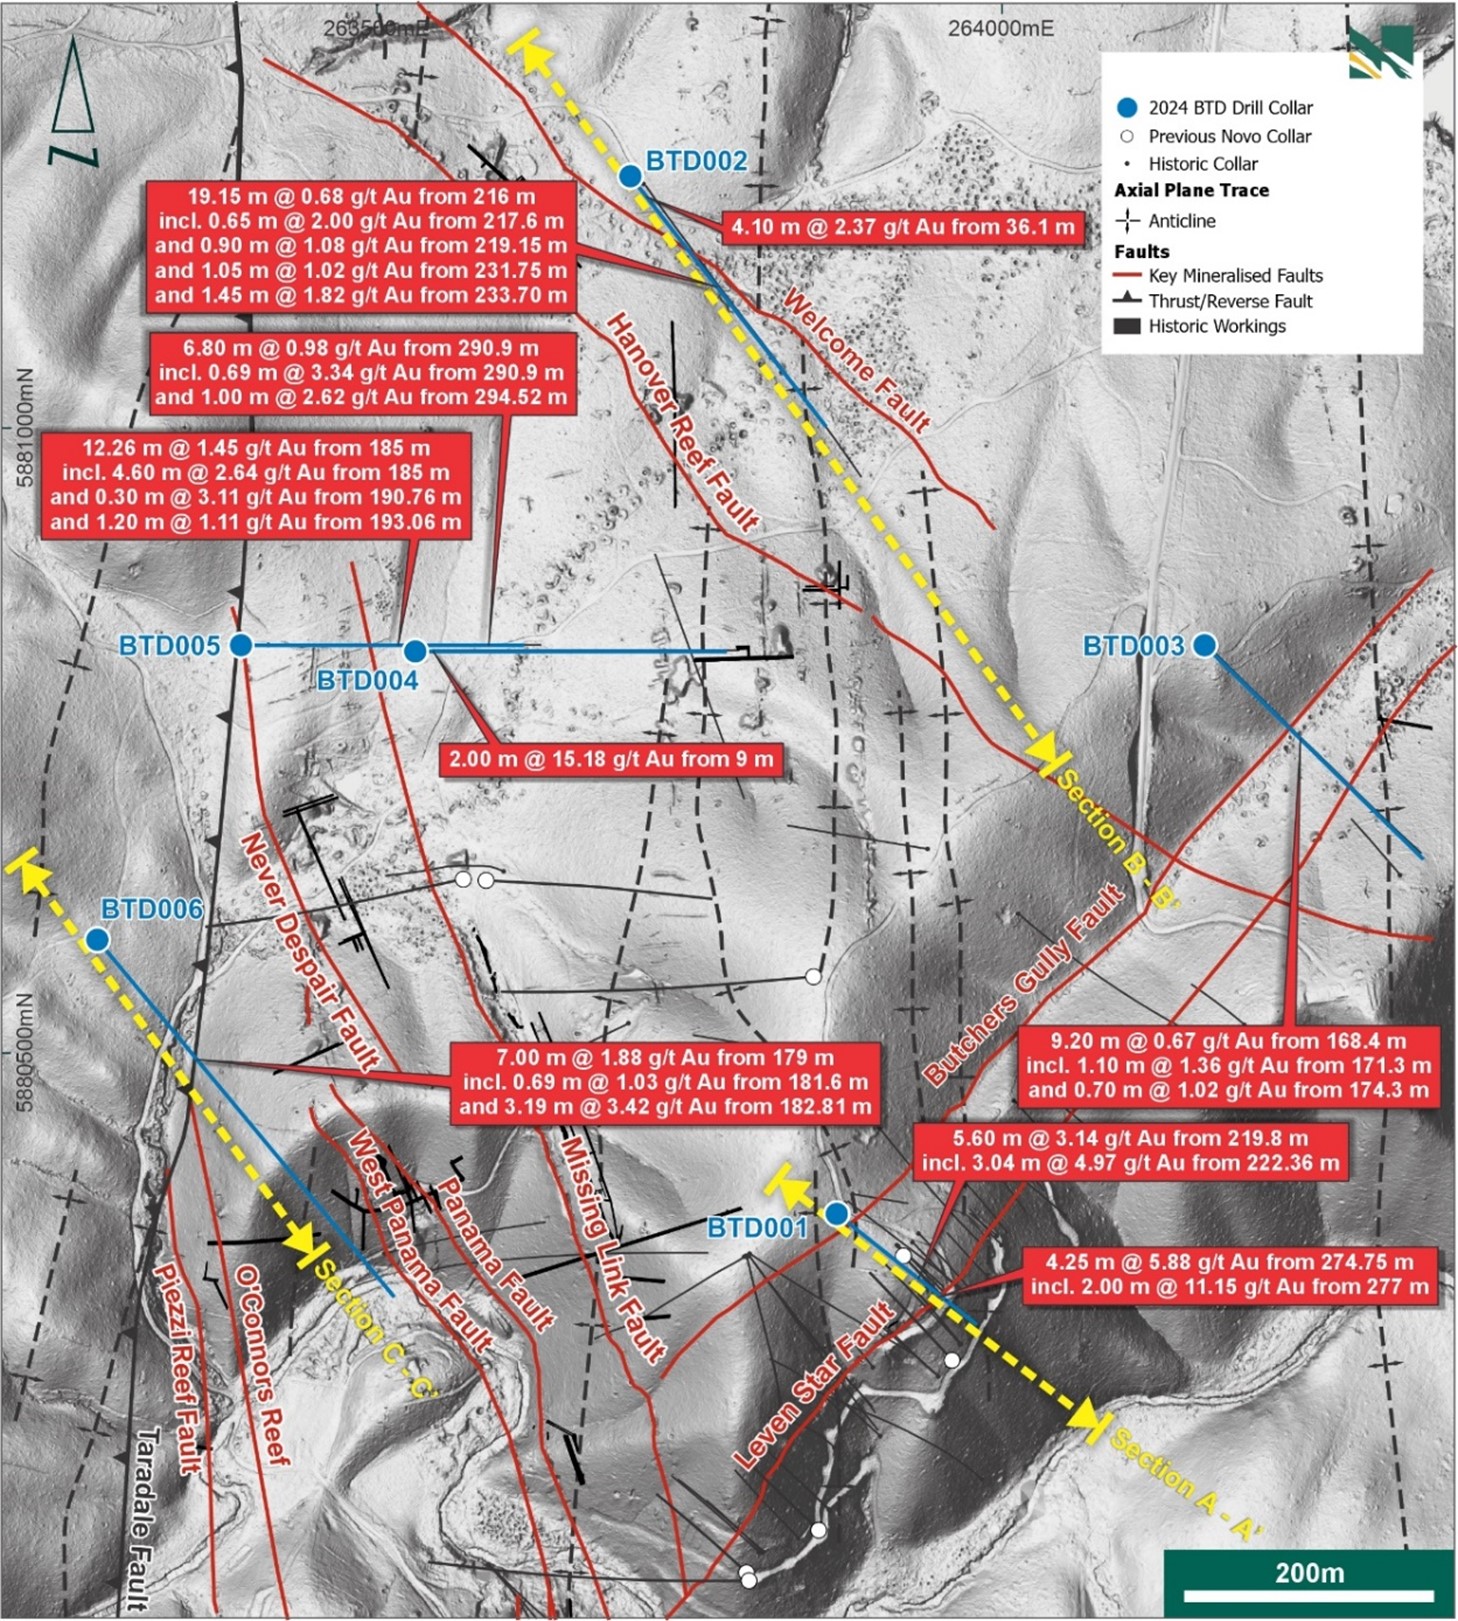 Collar location map and drill azimuth for six recently completed diamond drill holes with key significant intervals highlighted. Projected mining infrastructure in addition to key target mineralised reefs (red lines) also depicted.